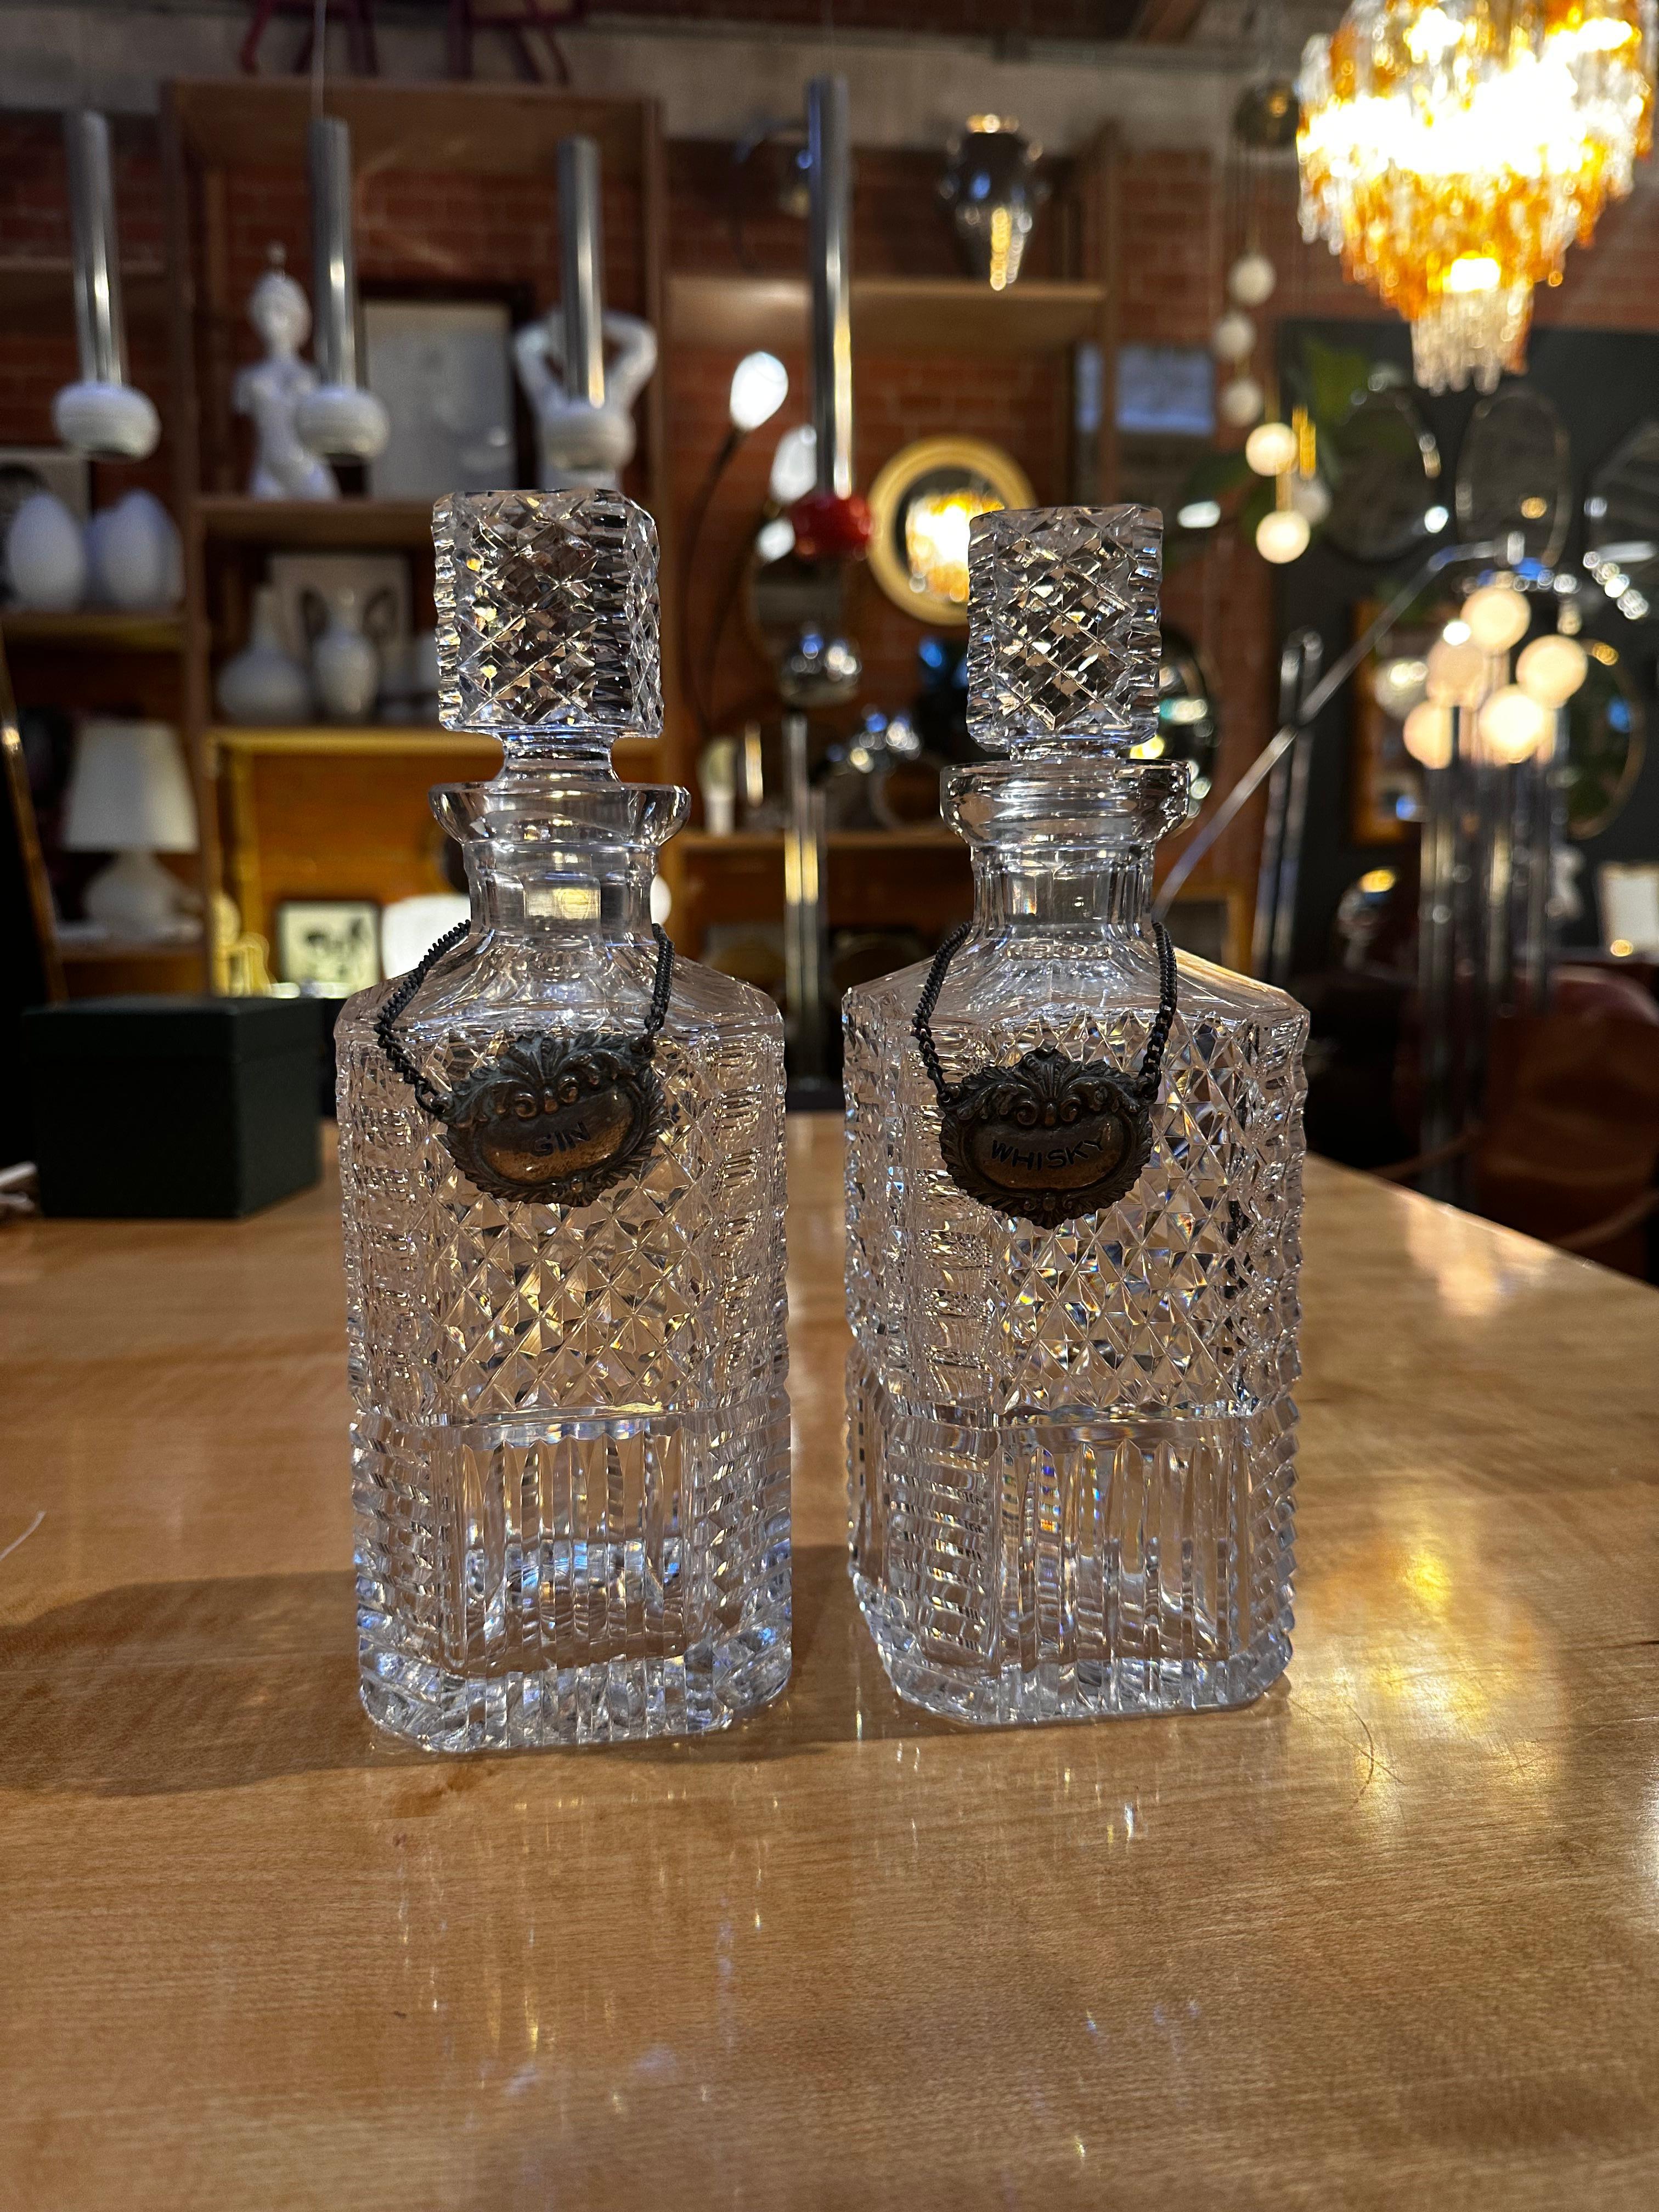 A Pair of 2 Crystal Decanters from the 1960s, one designed for gin and the other for whiskey, are exquisite examples of mid-century barware. Crafted from high-quality crystal, these decanters showcase the elegance and attention to detail